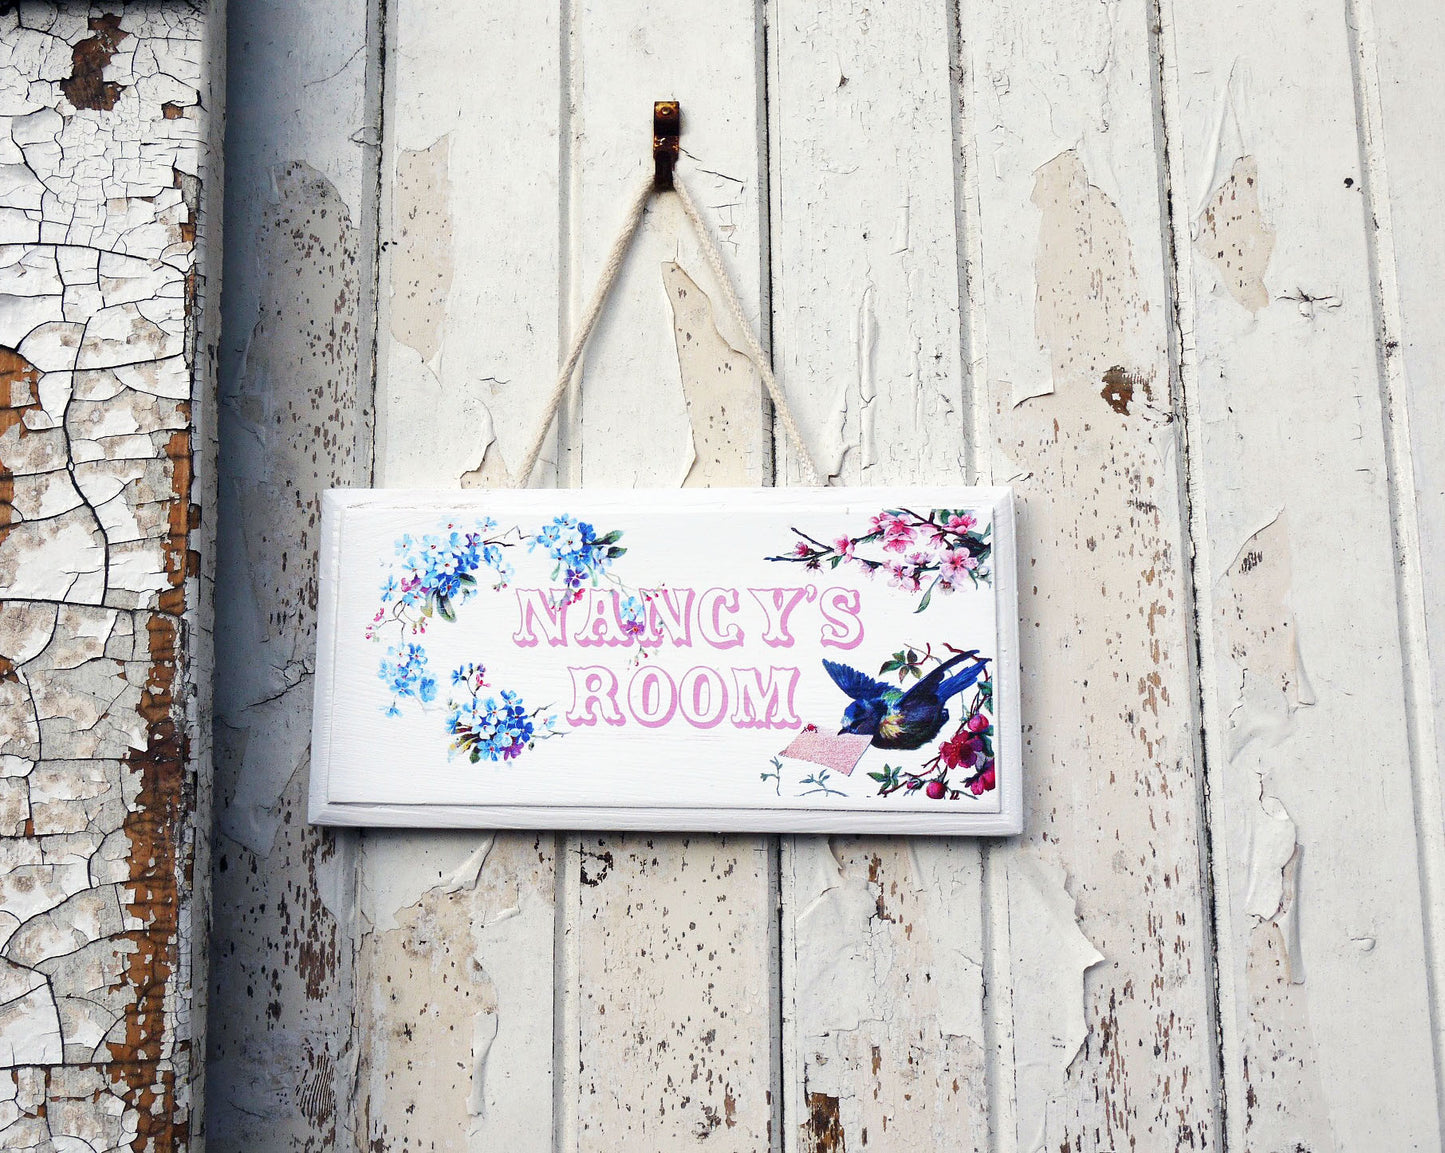 Personalised children's door room sign  - made to order you choose the theme